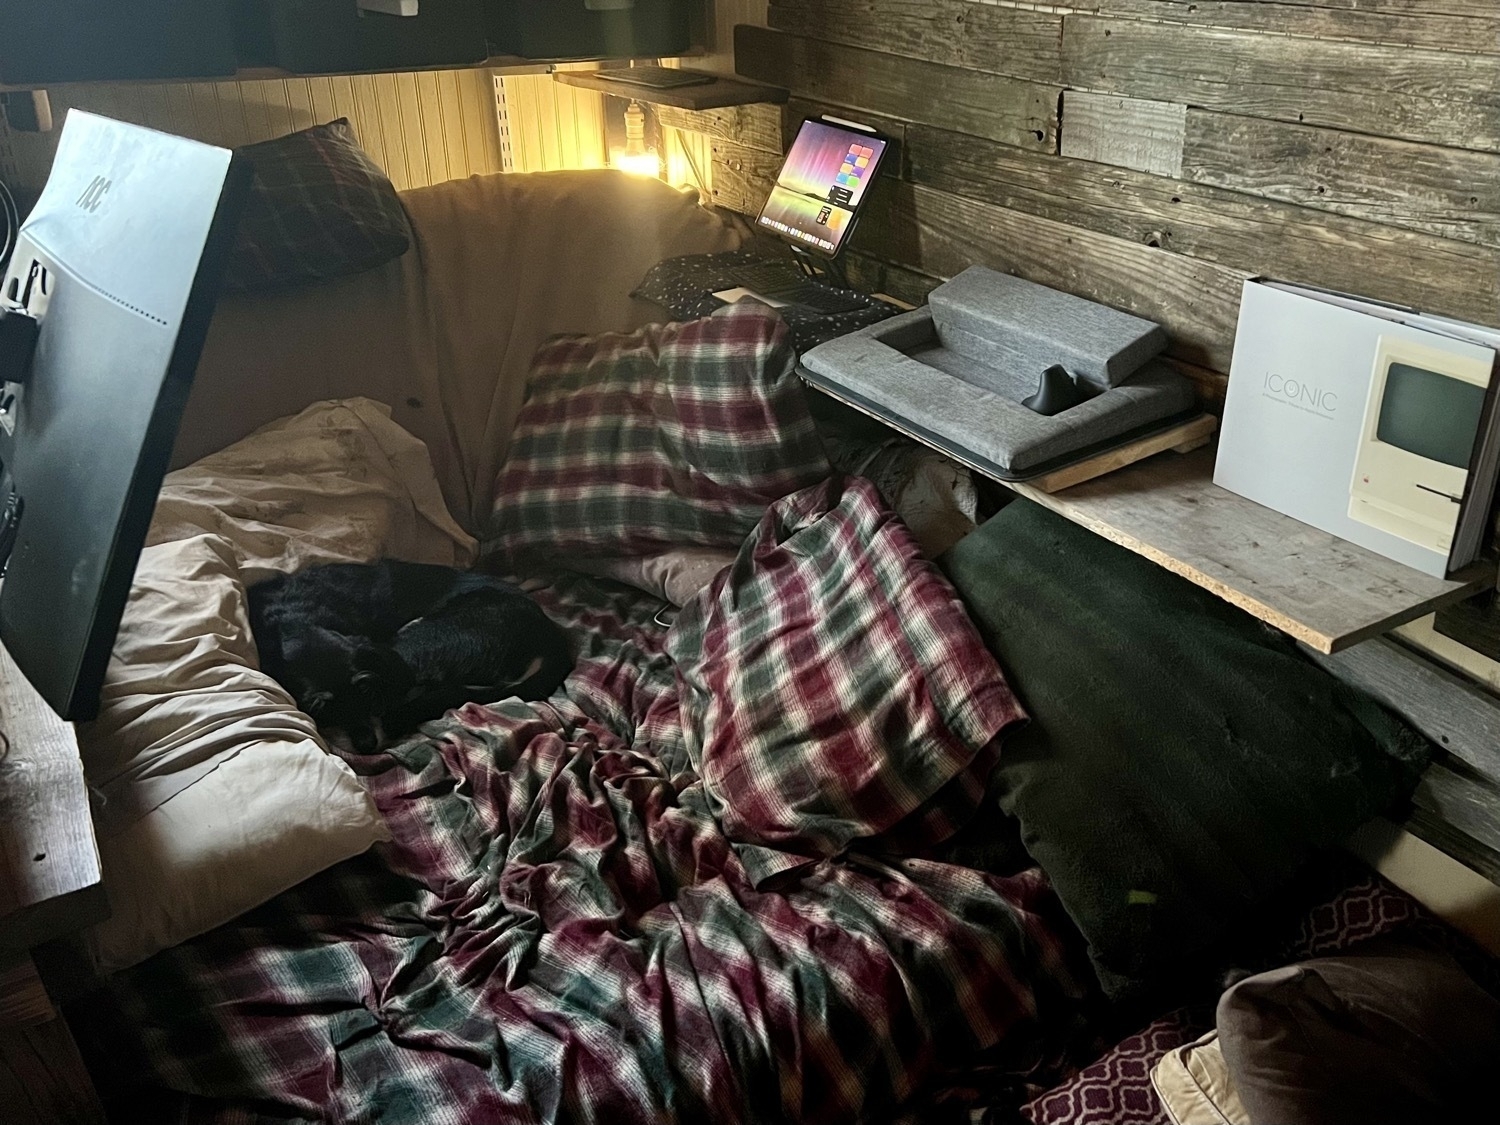 A futon on the floor of a tiny house. A dog is curled up on the futon and is nestled in with several pillows around it. there are various shelves around it. On the right side an iPad on a shelf as well as various other items